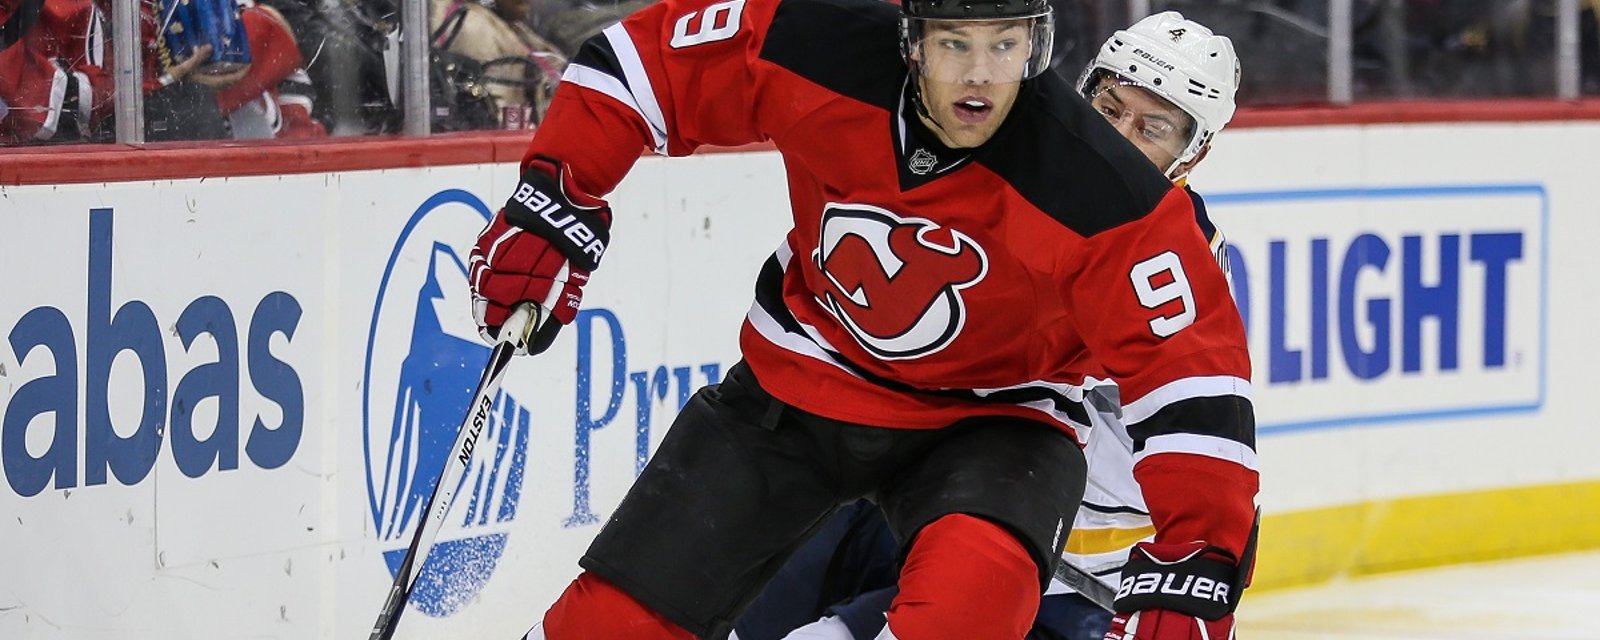 Taylor Hall may come back from his injury well ahead of schedule.